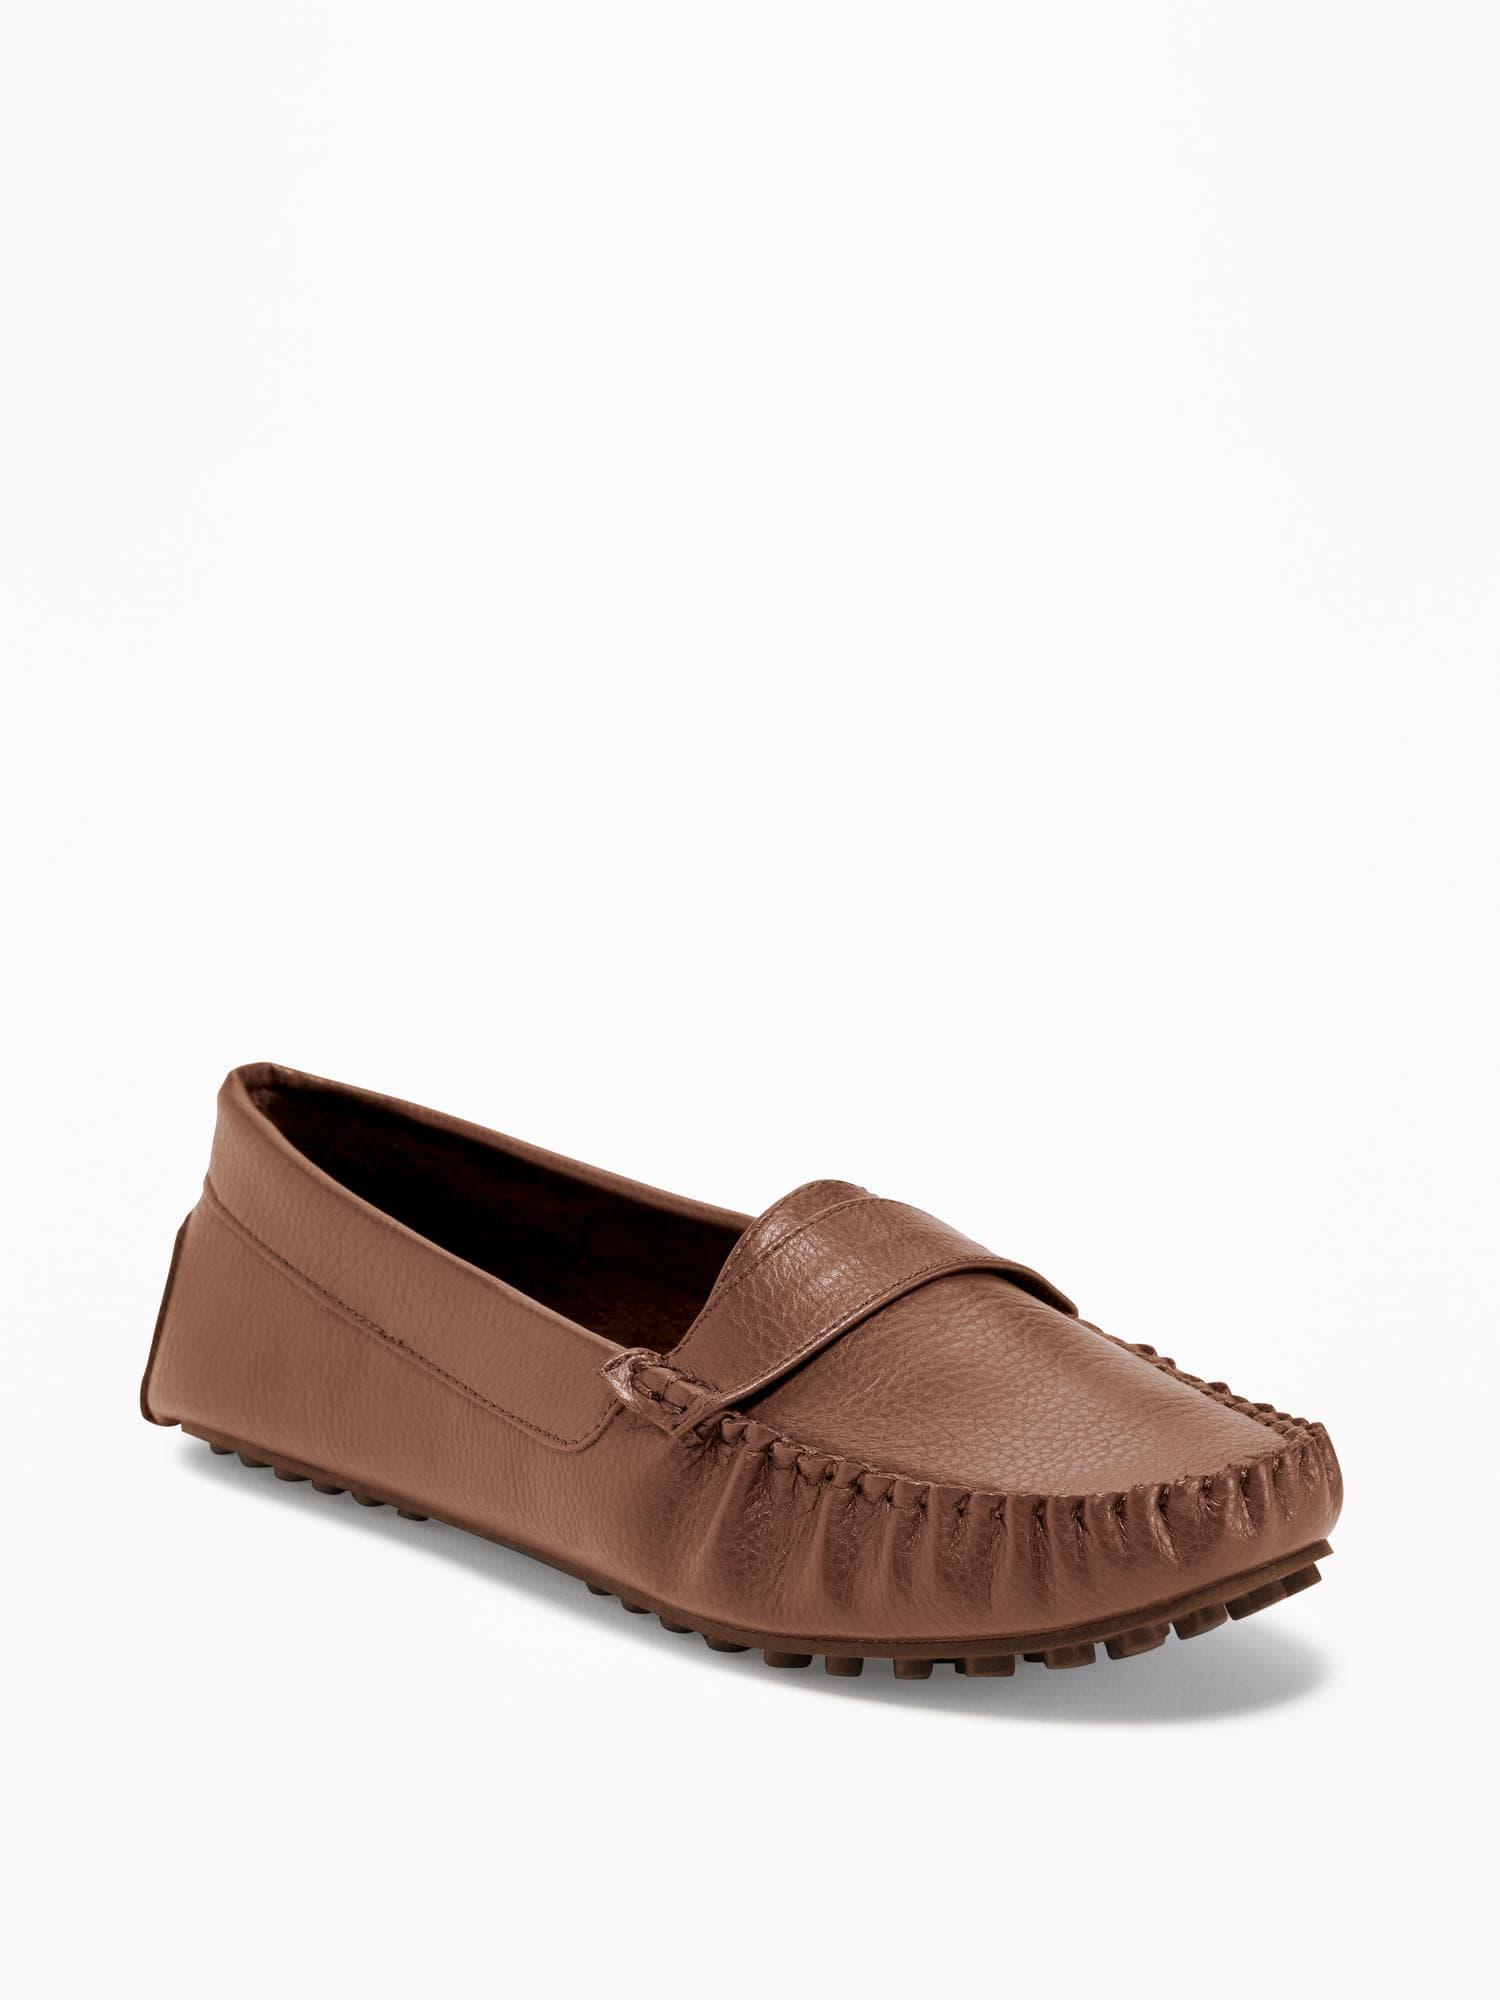 loafers old navy